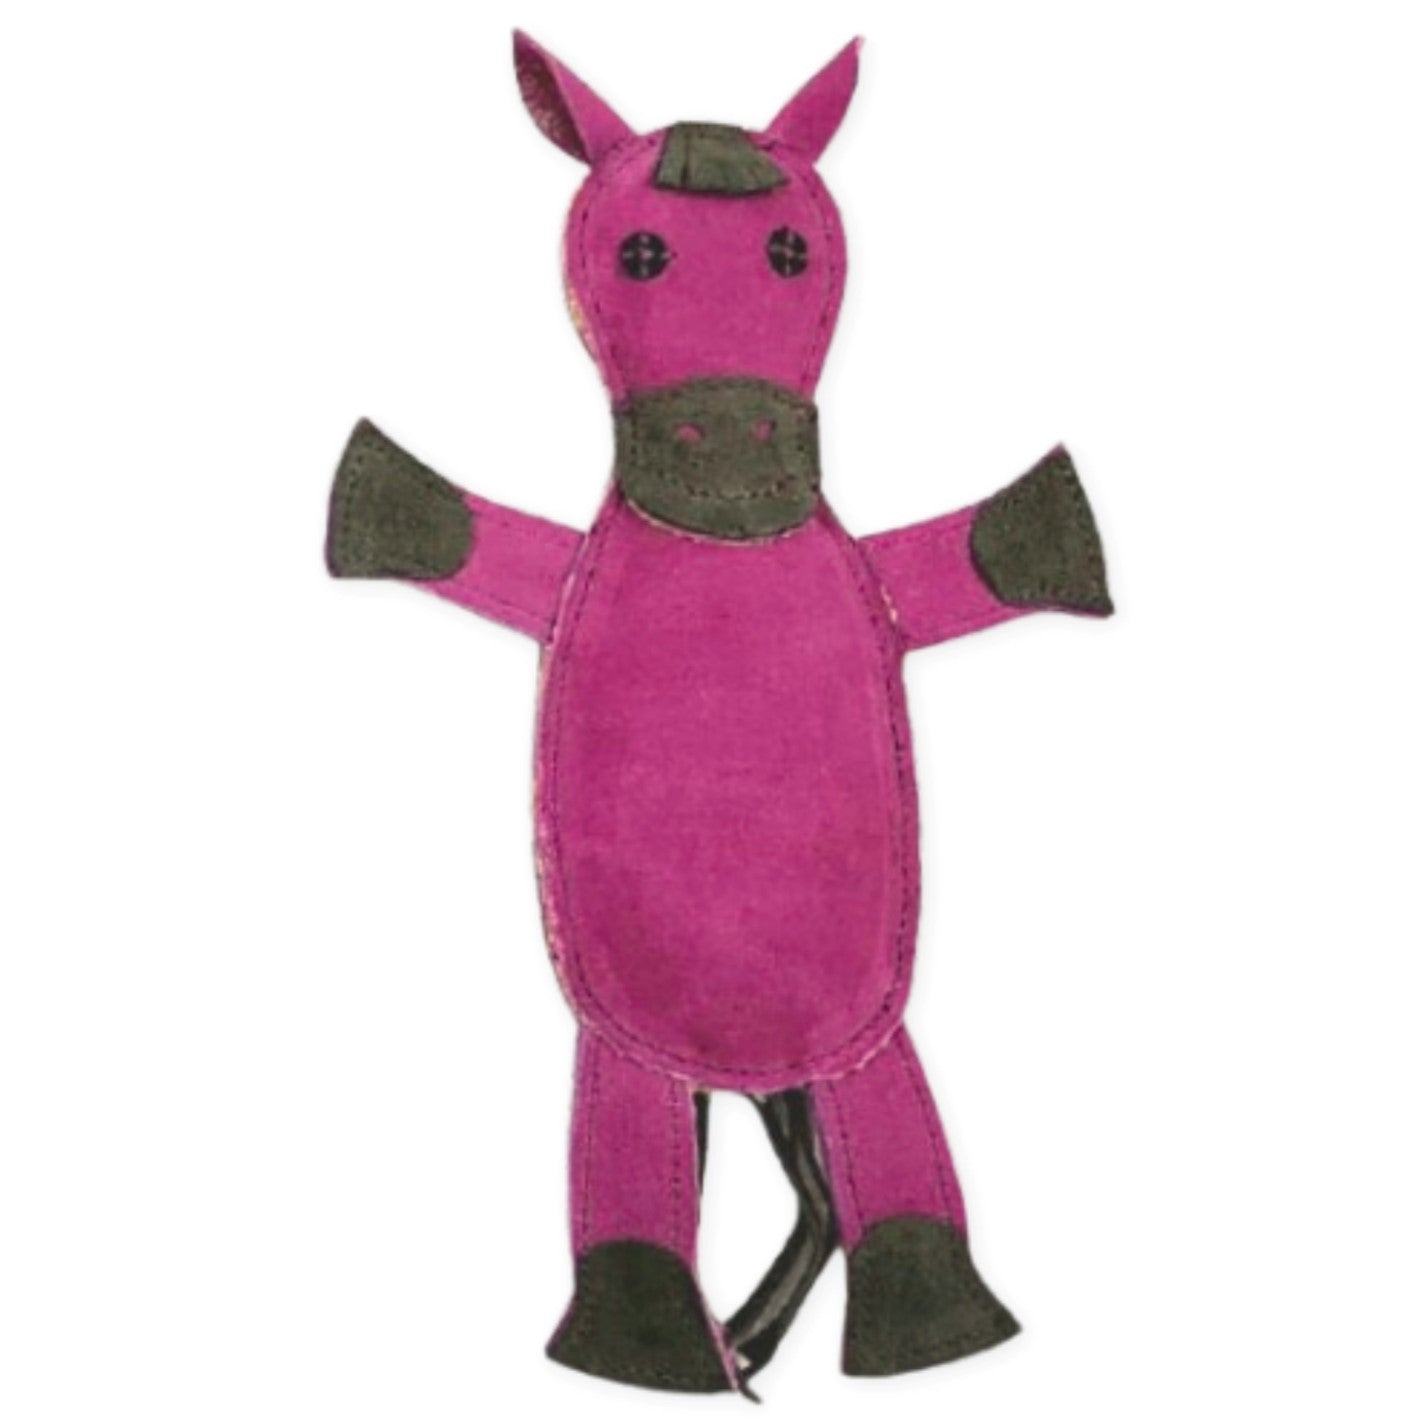 A plush toy shaped like Henry the Horse - hot pink with a darker pink mane, featuring simple embroidered details and contrasting dark patches on the hooves and muzzle. This eco-friendly dog toy is made from biodegradable materials. Available from Georgie Paws.